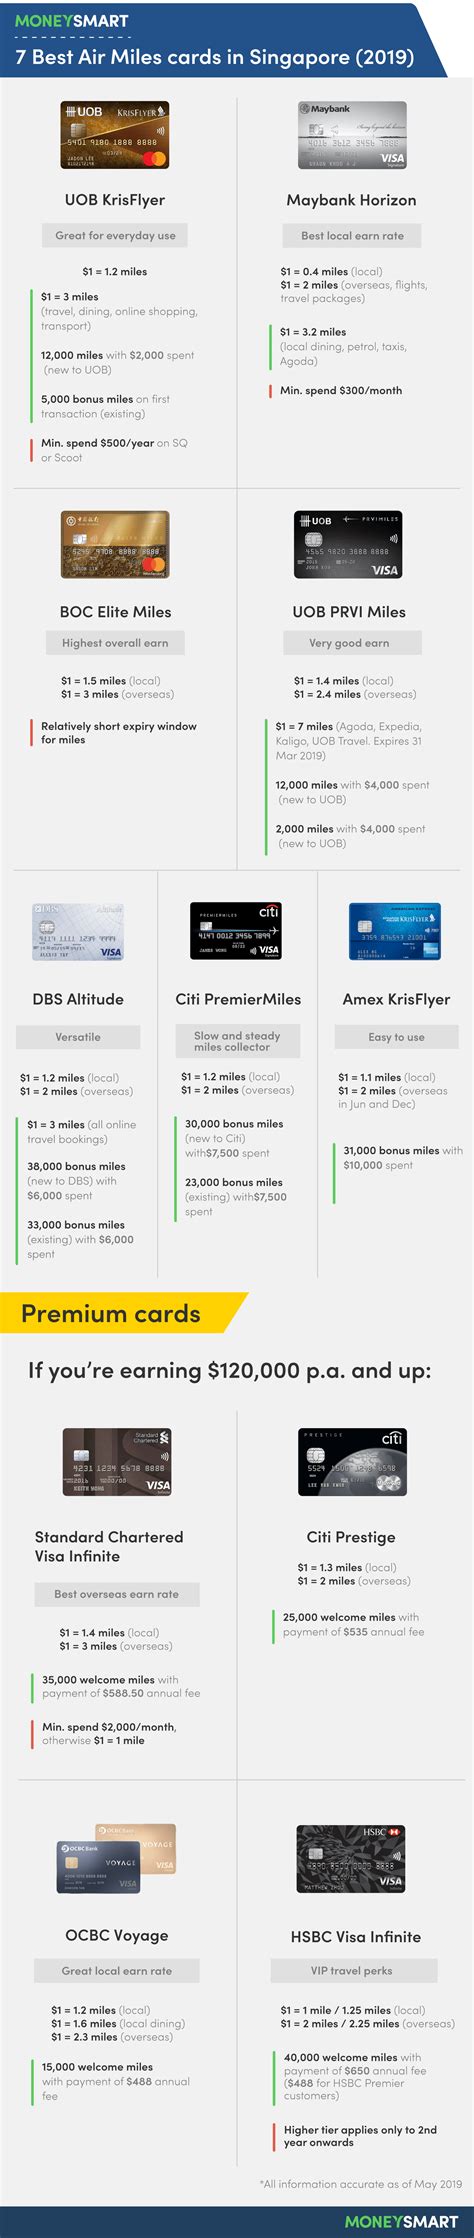 Miles can be redeemed for free flights. The 7 Best Air Miles Credit Cards in Singapore (2019)